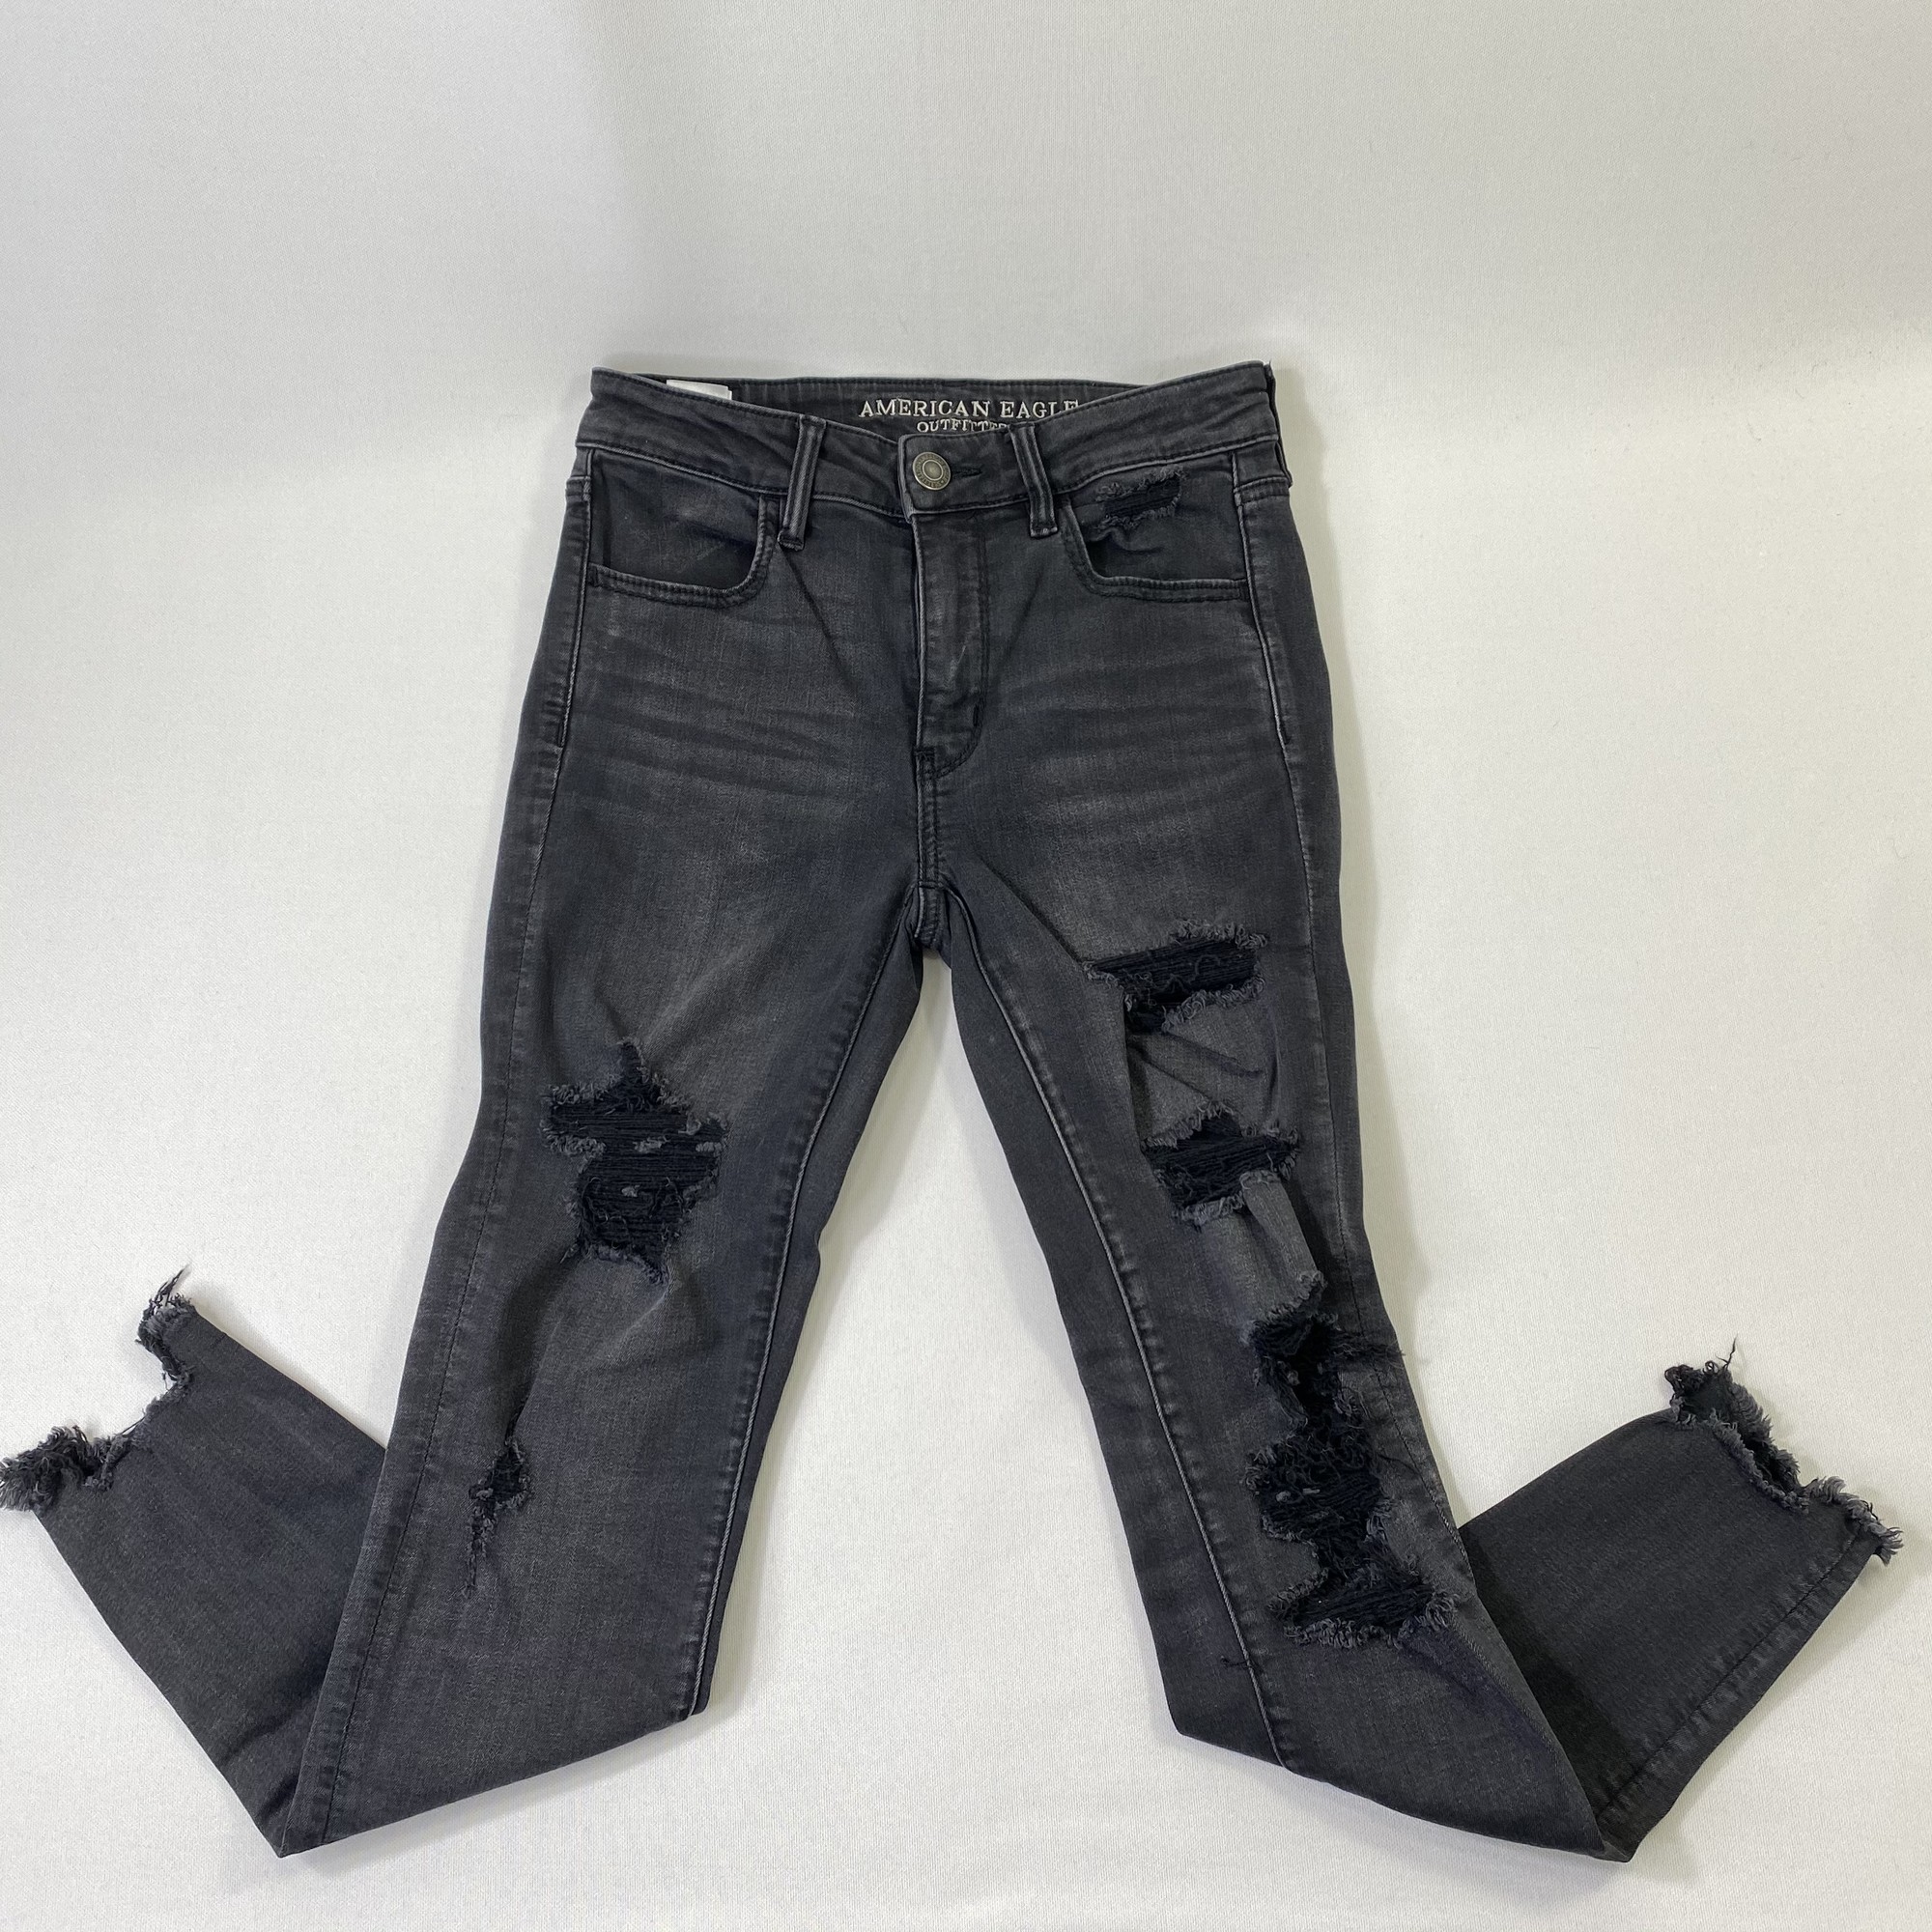 American Eagle Women's Jeans for sale in Scotland, Connecticut